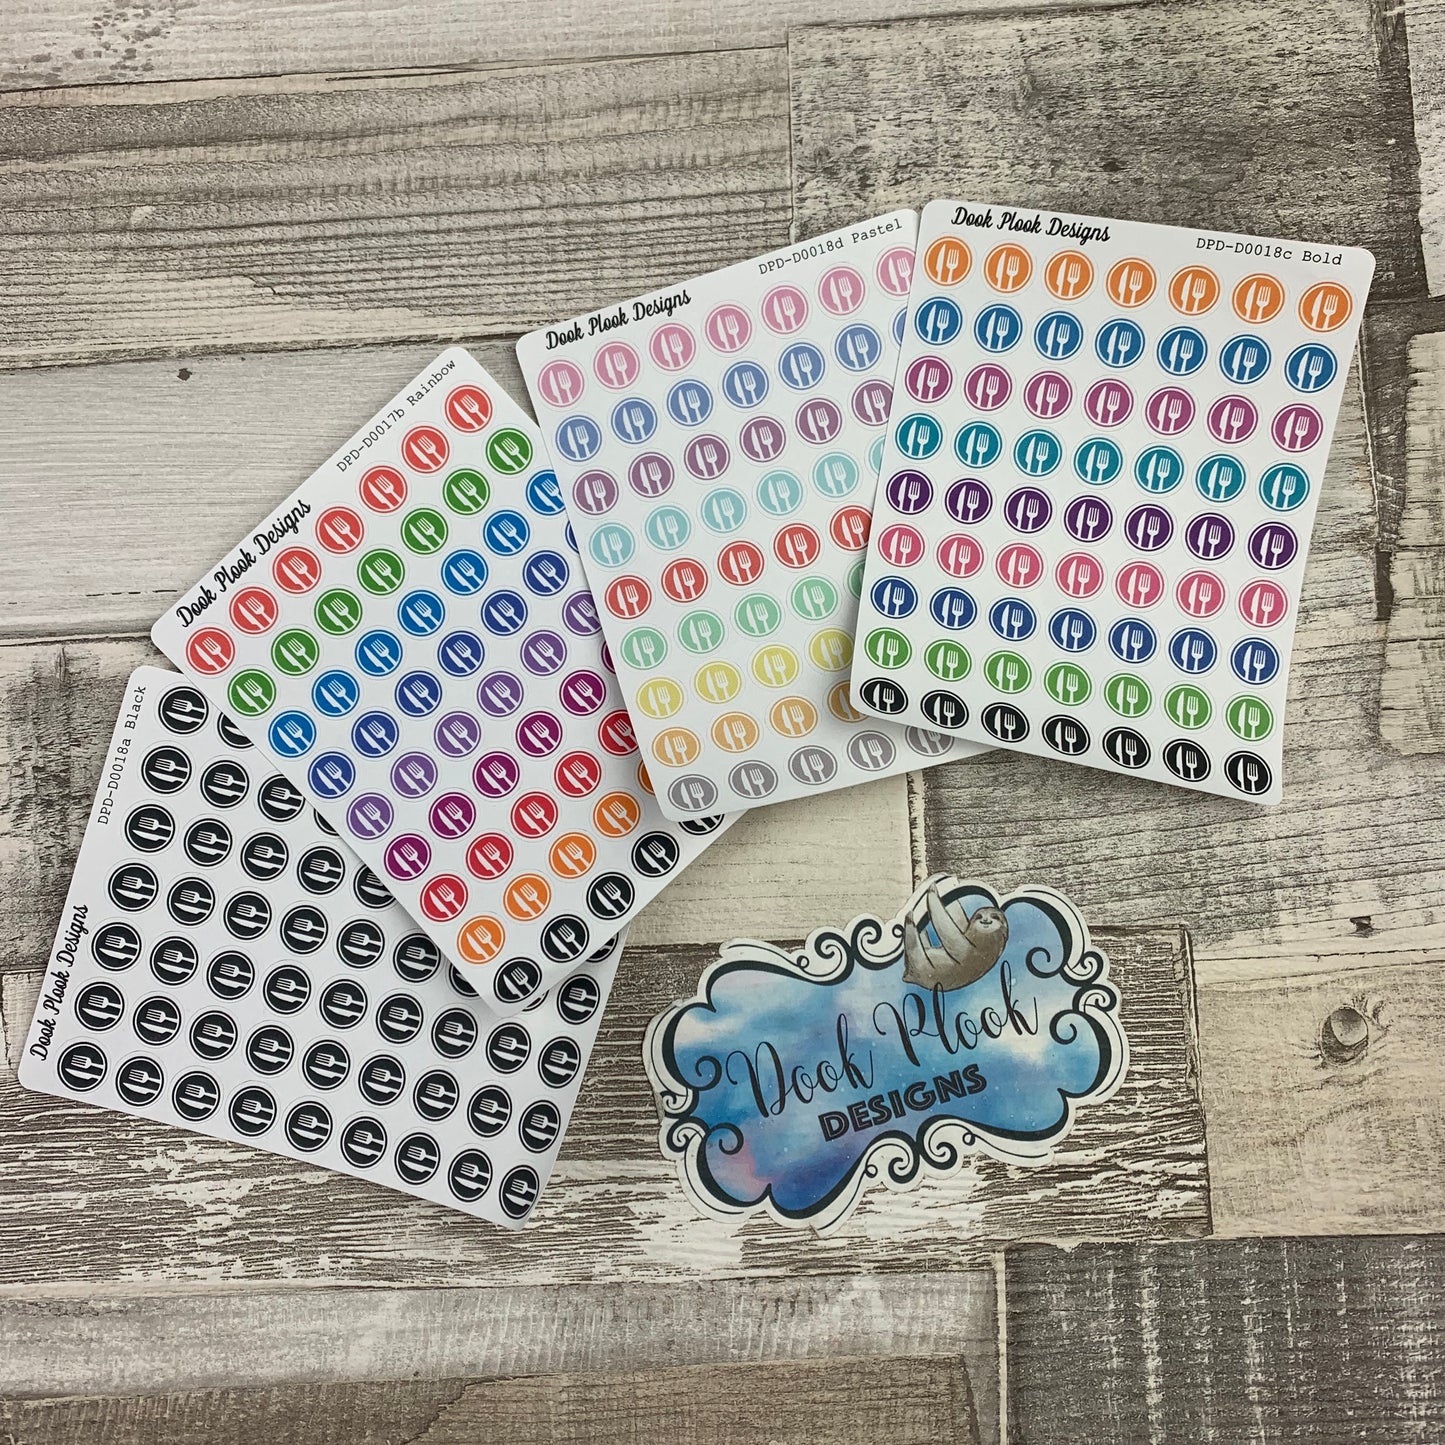 Tiny knife and fork / meal / food plan stickers (Dinkies) (DPD-D018)